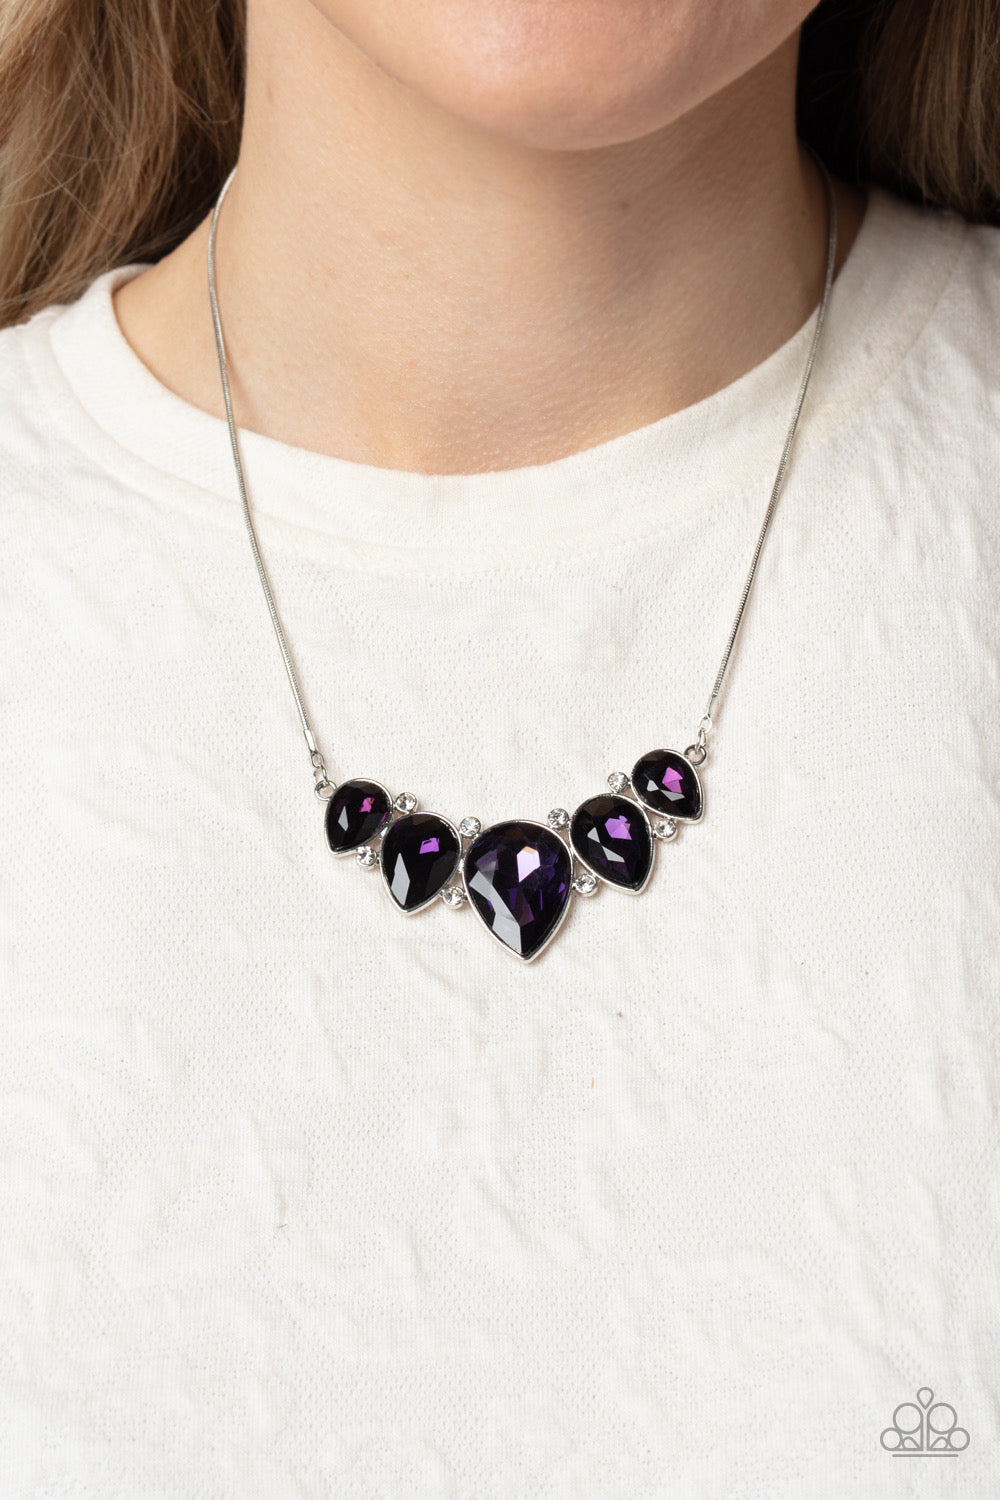 Paparazzi Regally Refined - Purple Necklace -Paparazzi Jewelry Images 